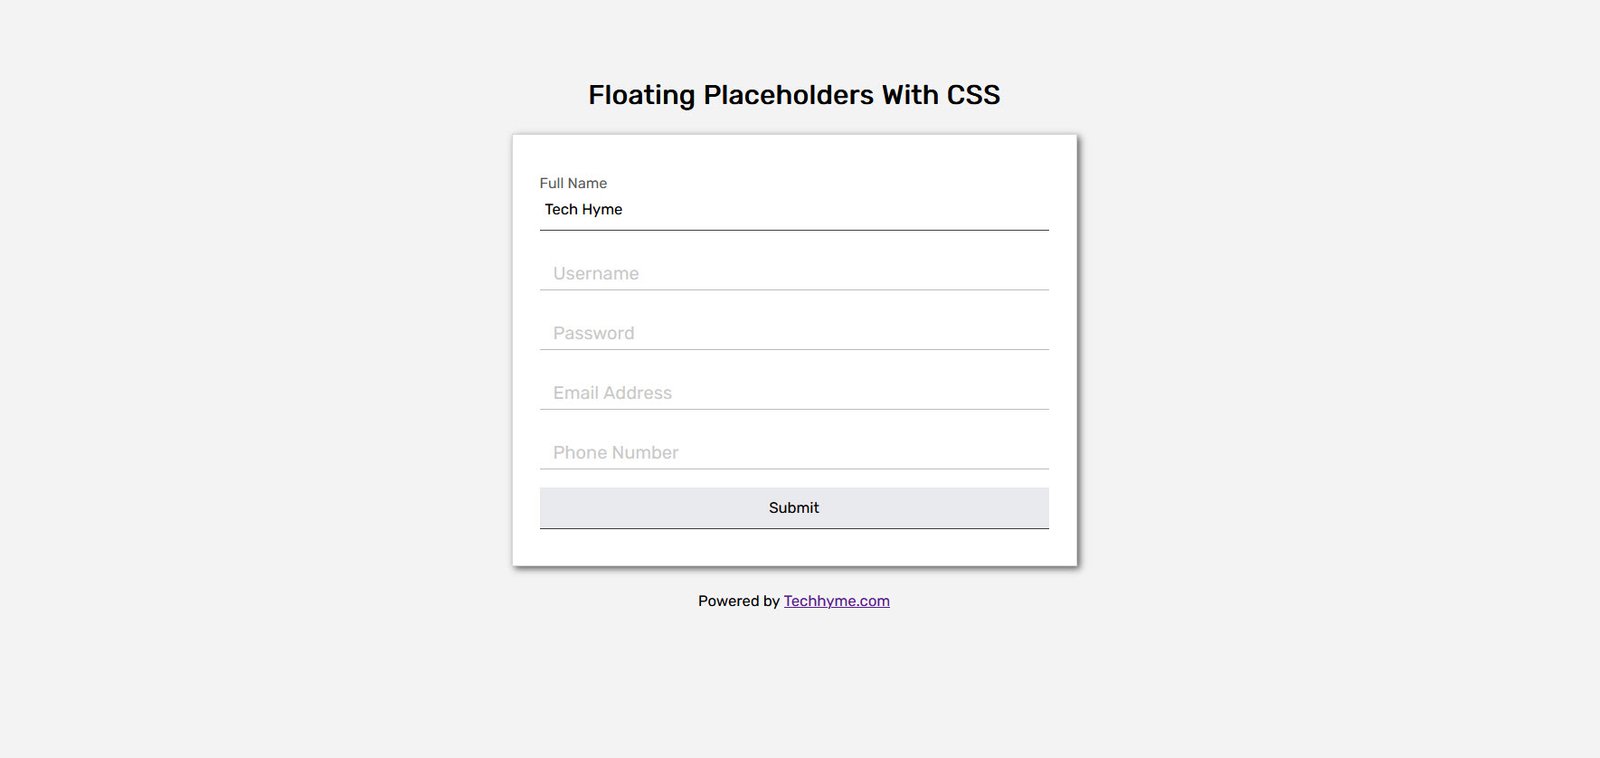 Floating Placeholder with CSS techhyme